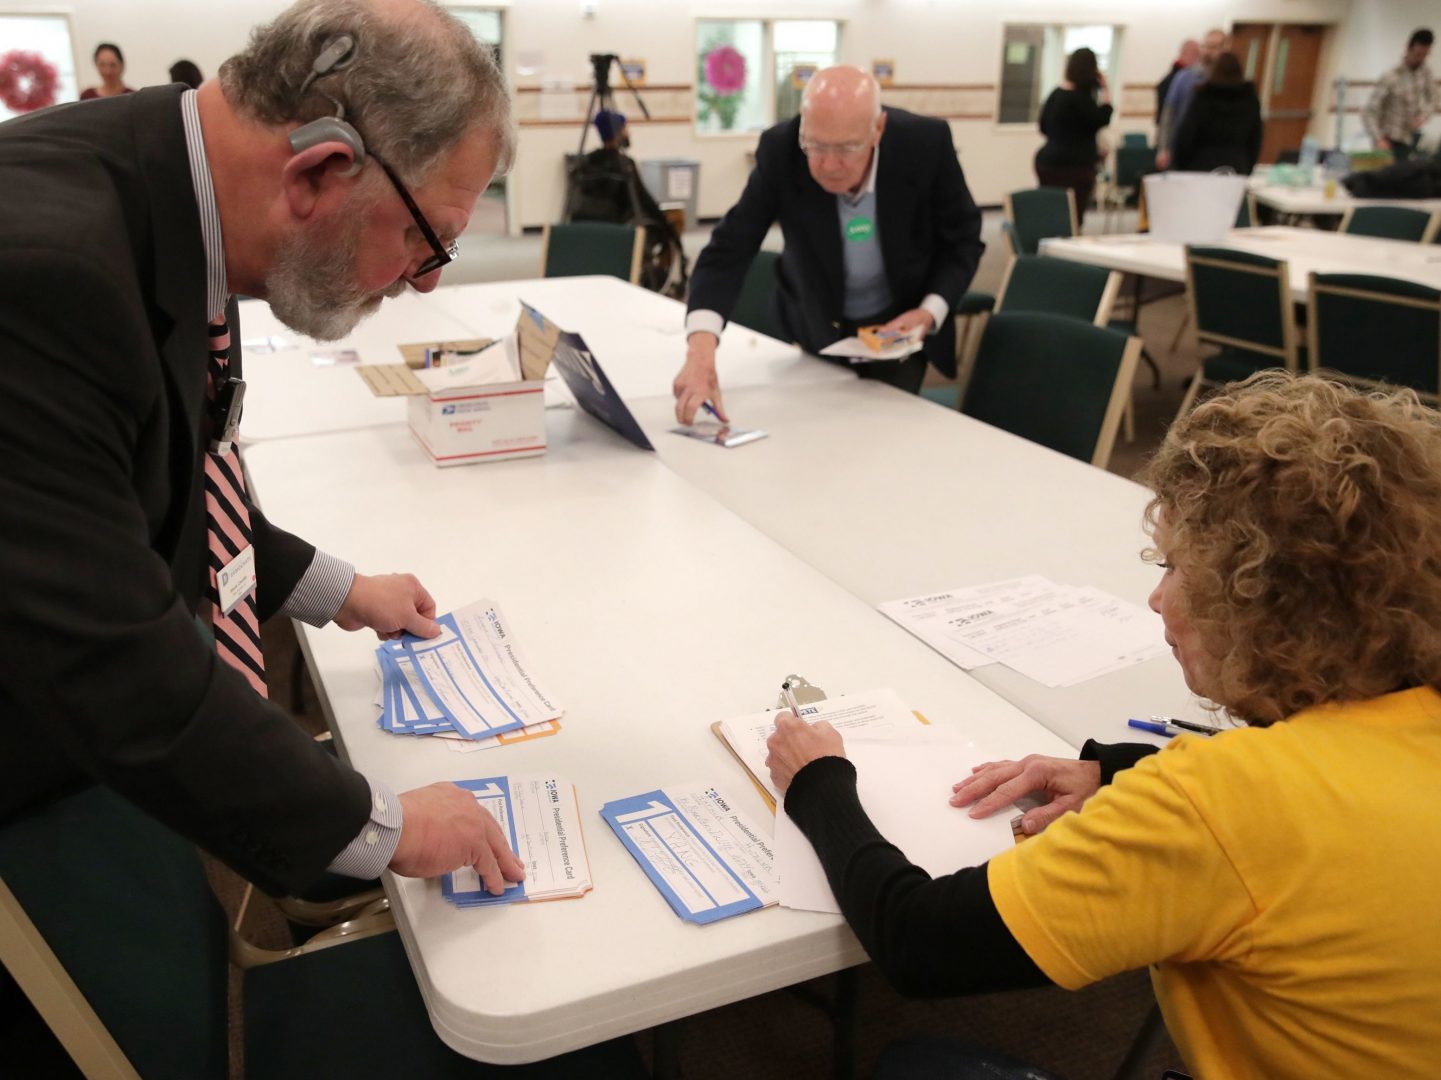 Presidential preference cards are counted at a caucus at West Des Moines Christian Church in Iowa on Monday. Problems with a smartphone app designed to report the caucus results ended up delaying an official count.